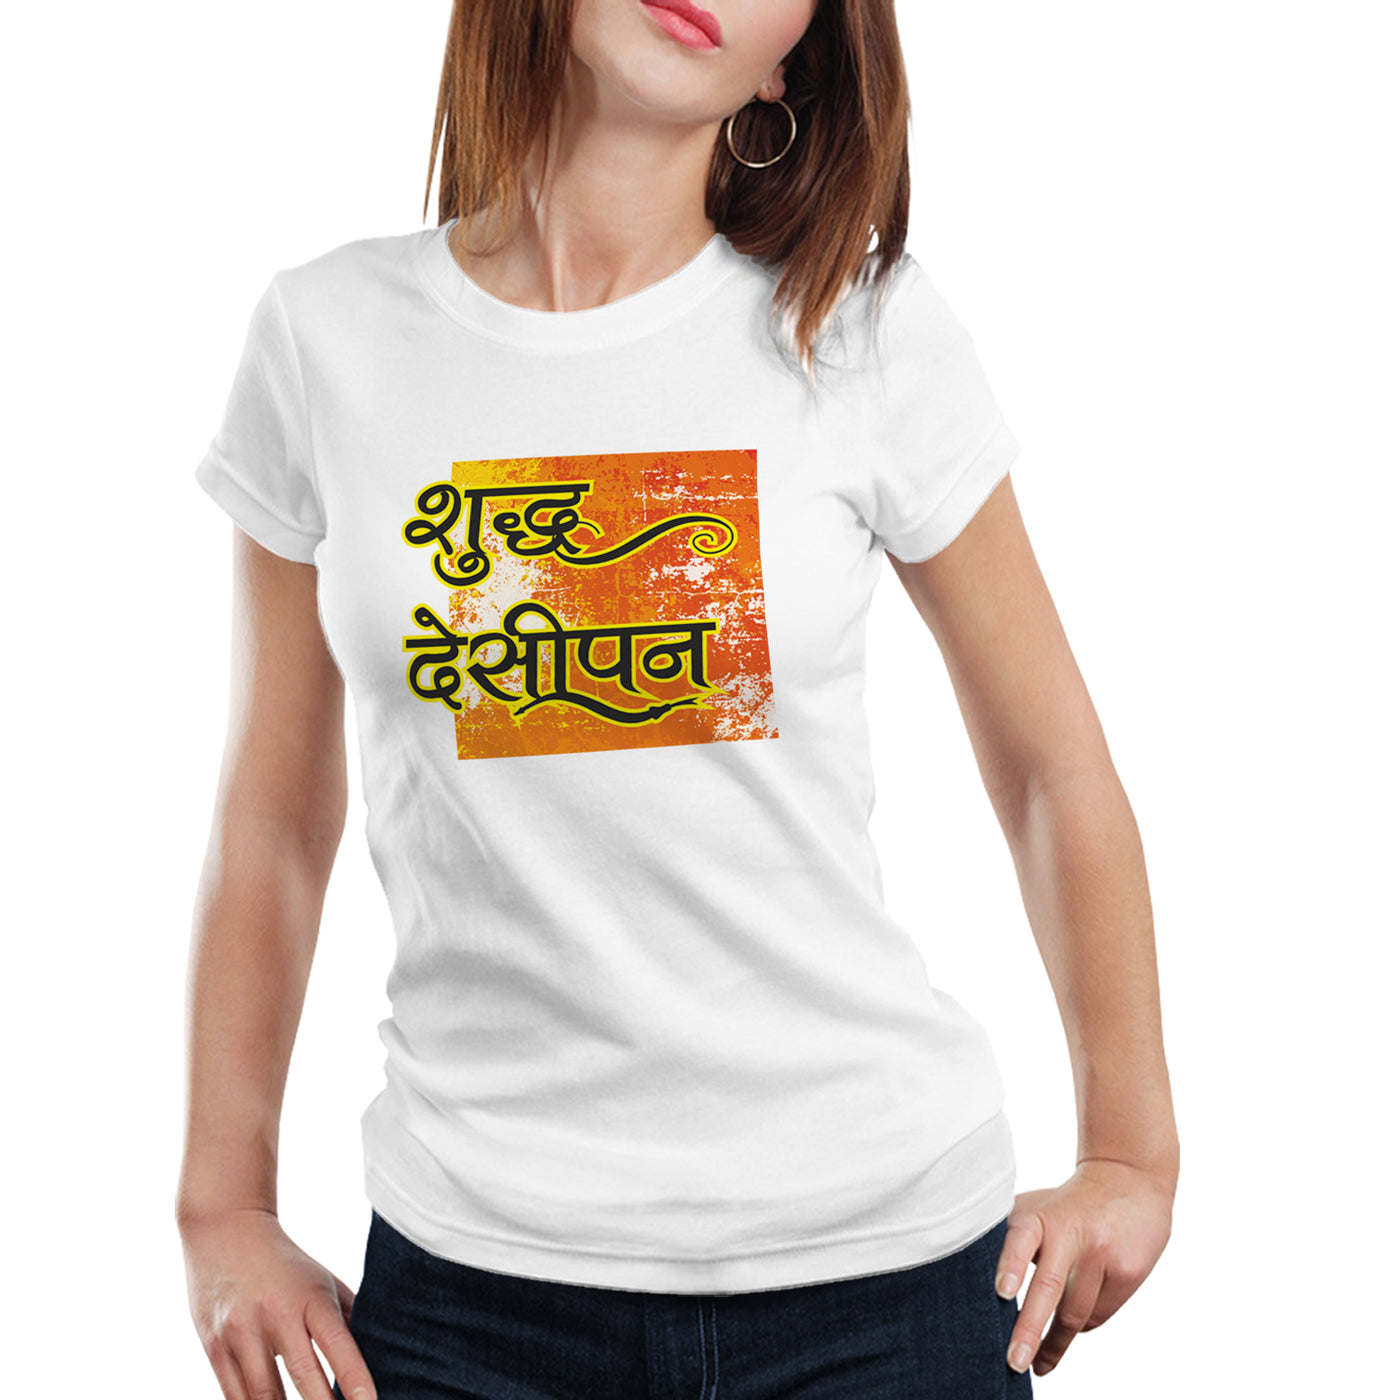 iberry's Independence day t shirt | Republic day t shirts |India t shirts |Patriotic tshirt |15 August t shirts |Round neck cotton tshirts -06